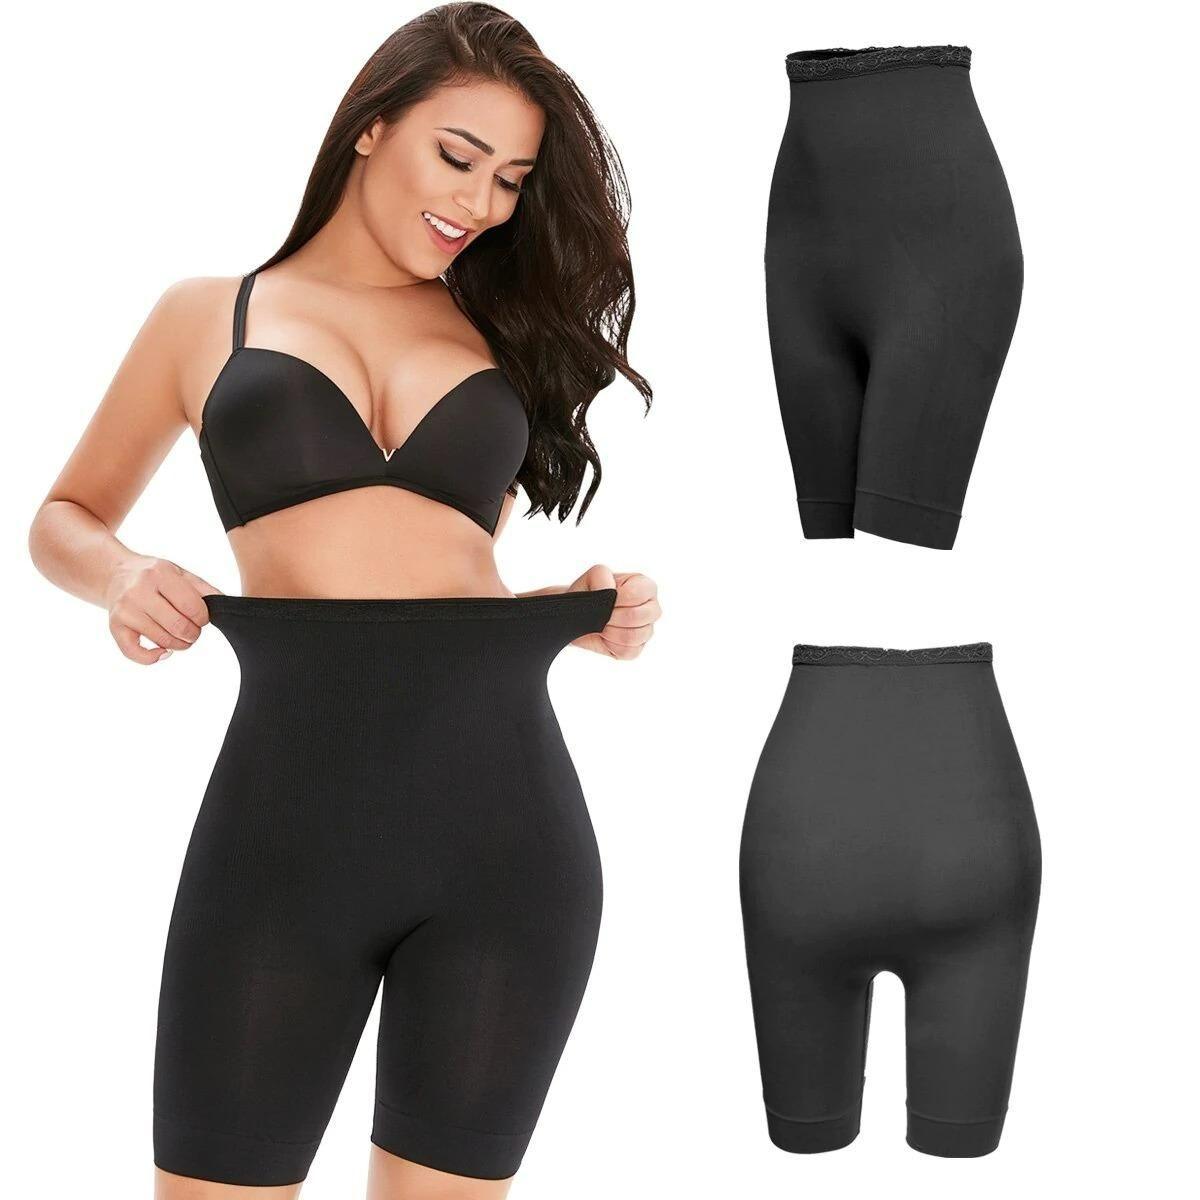 4-in-1 Quick Slim Tummy, Back, Thighs, Hips Body Shaper (Pack of 2)